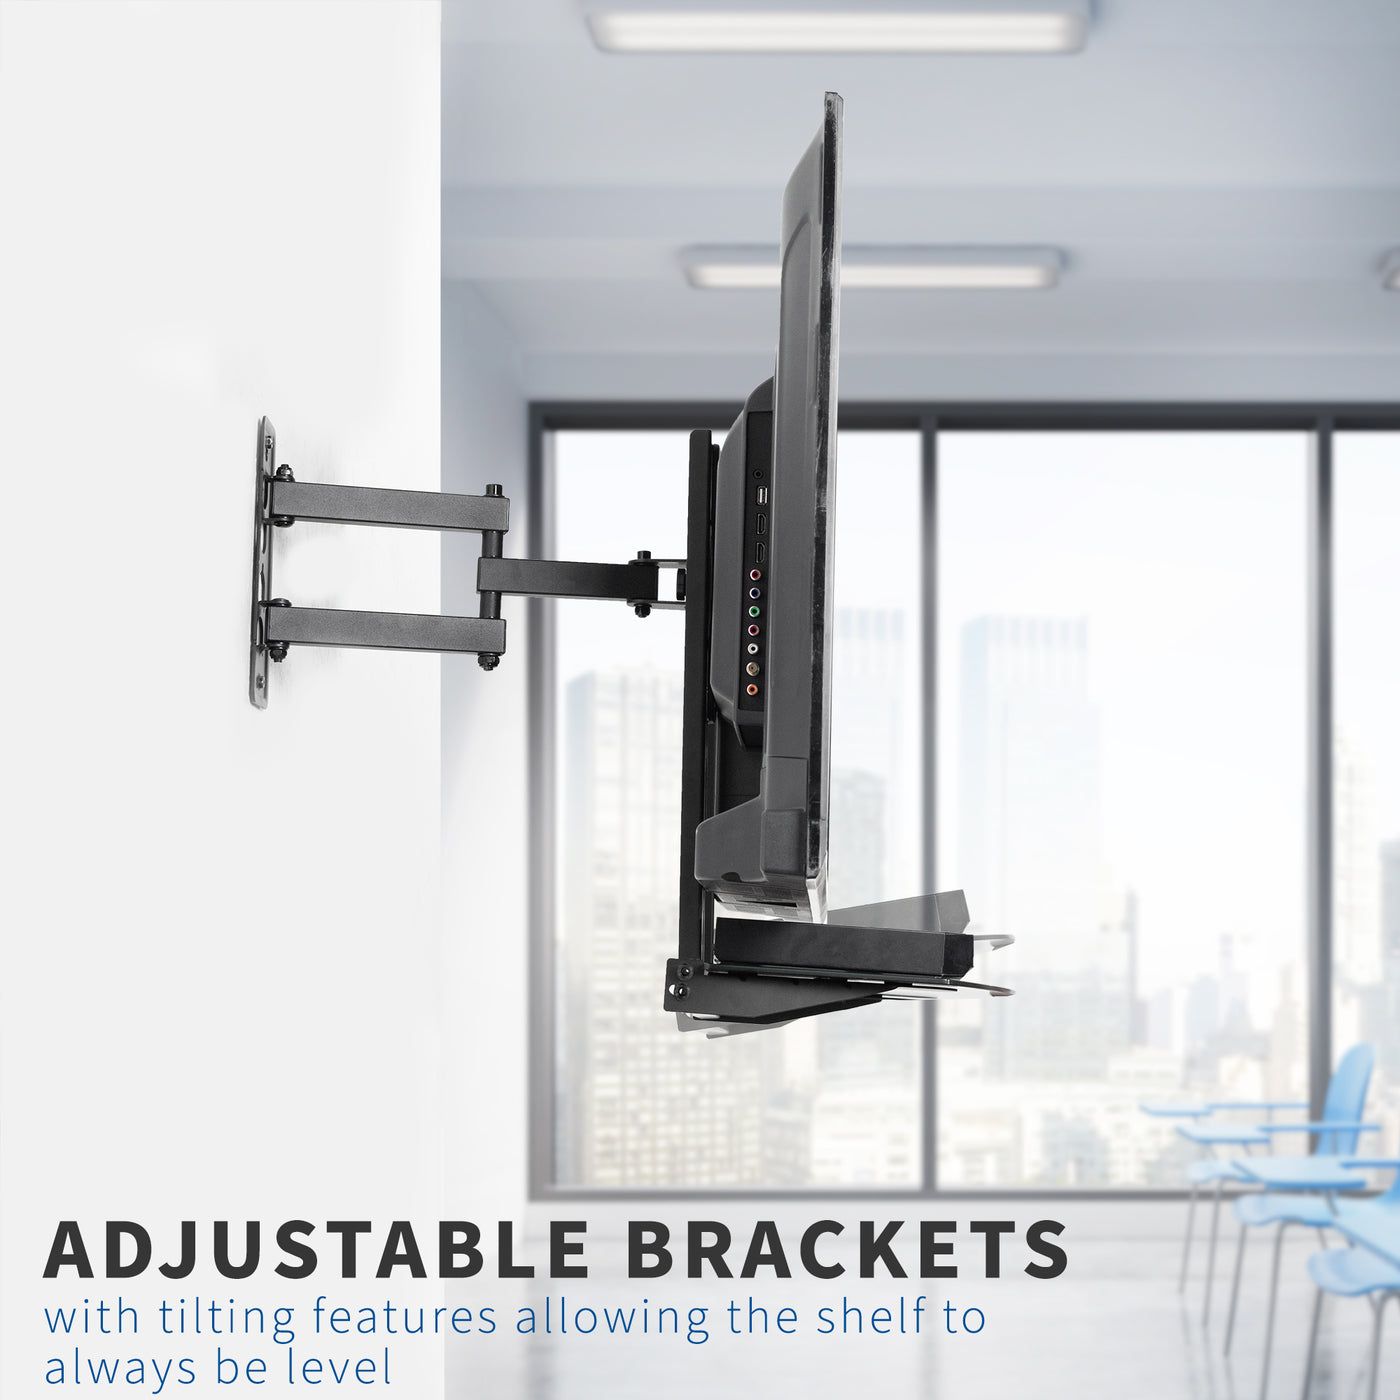 Adjustable shelf brackets allow for the articulation to best fit and accommodate the TV setup.